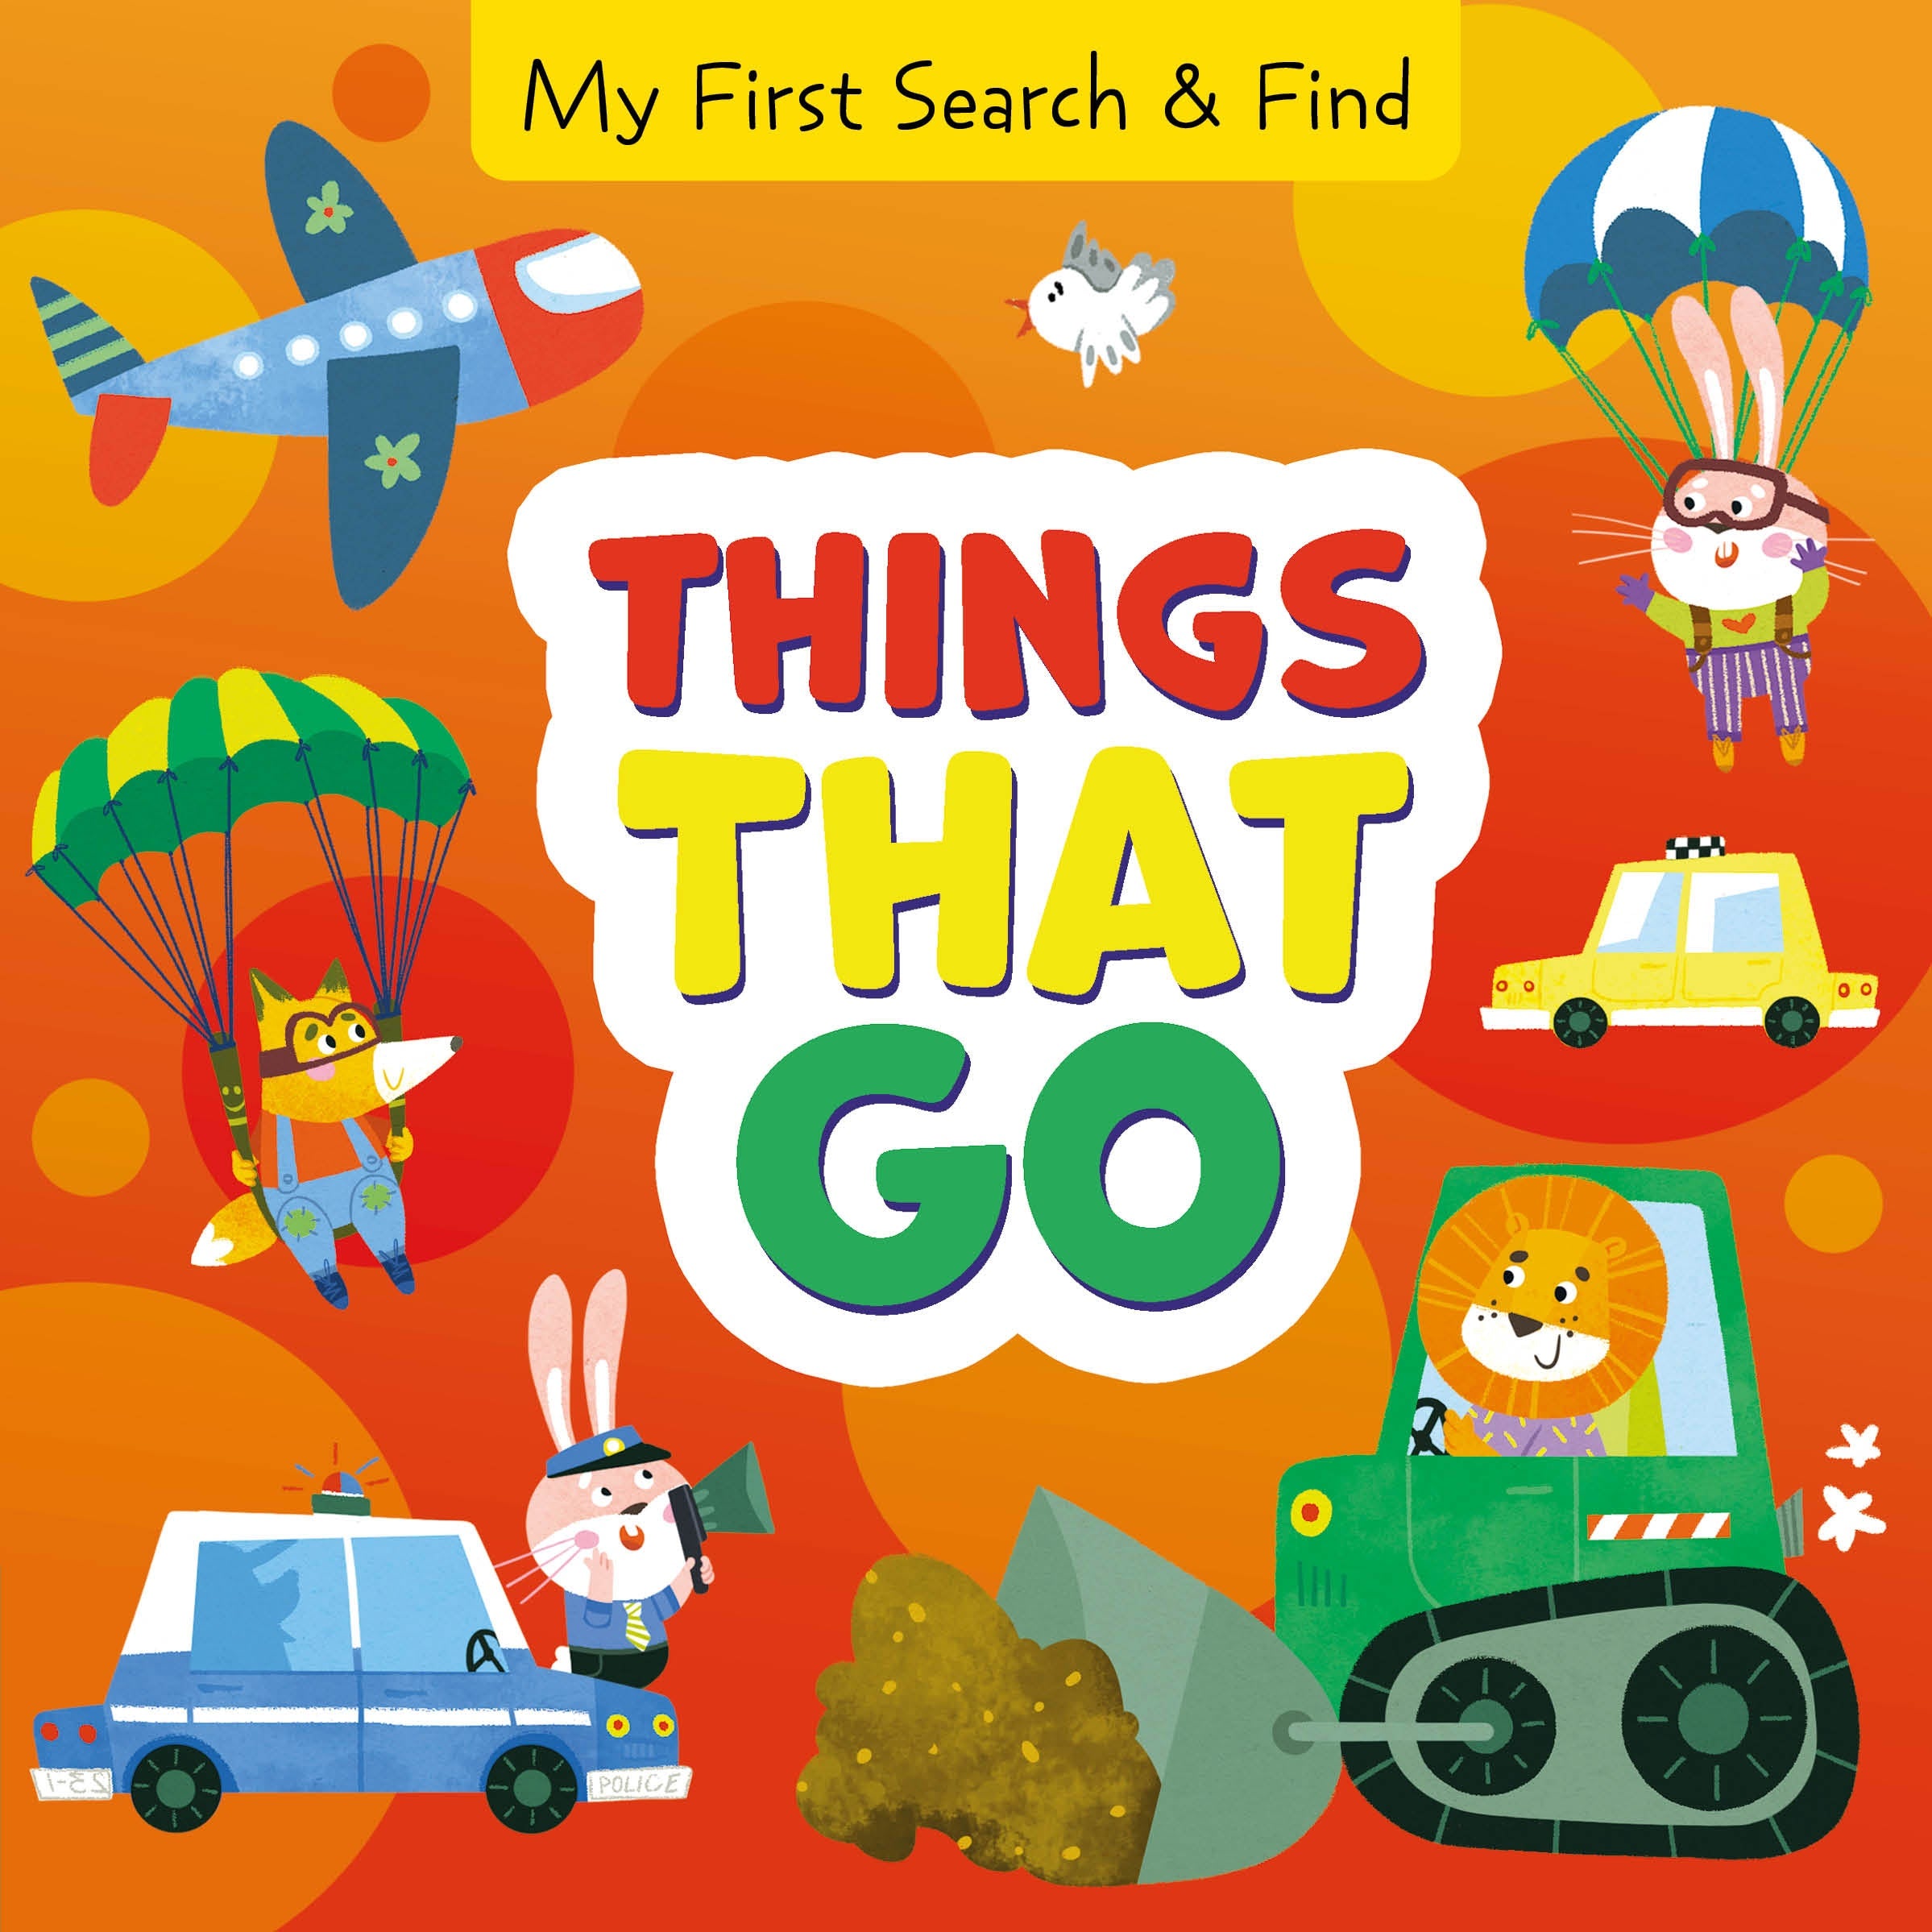 My First Search & Find | Things that Go